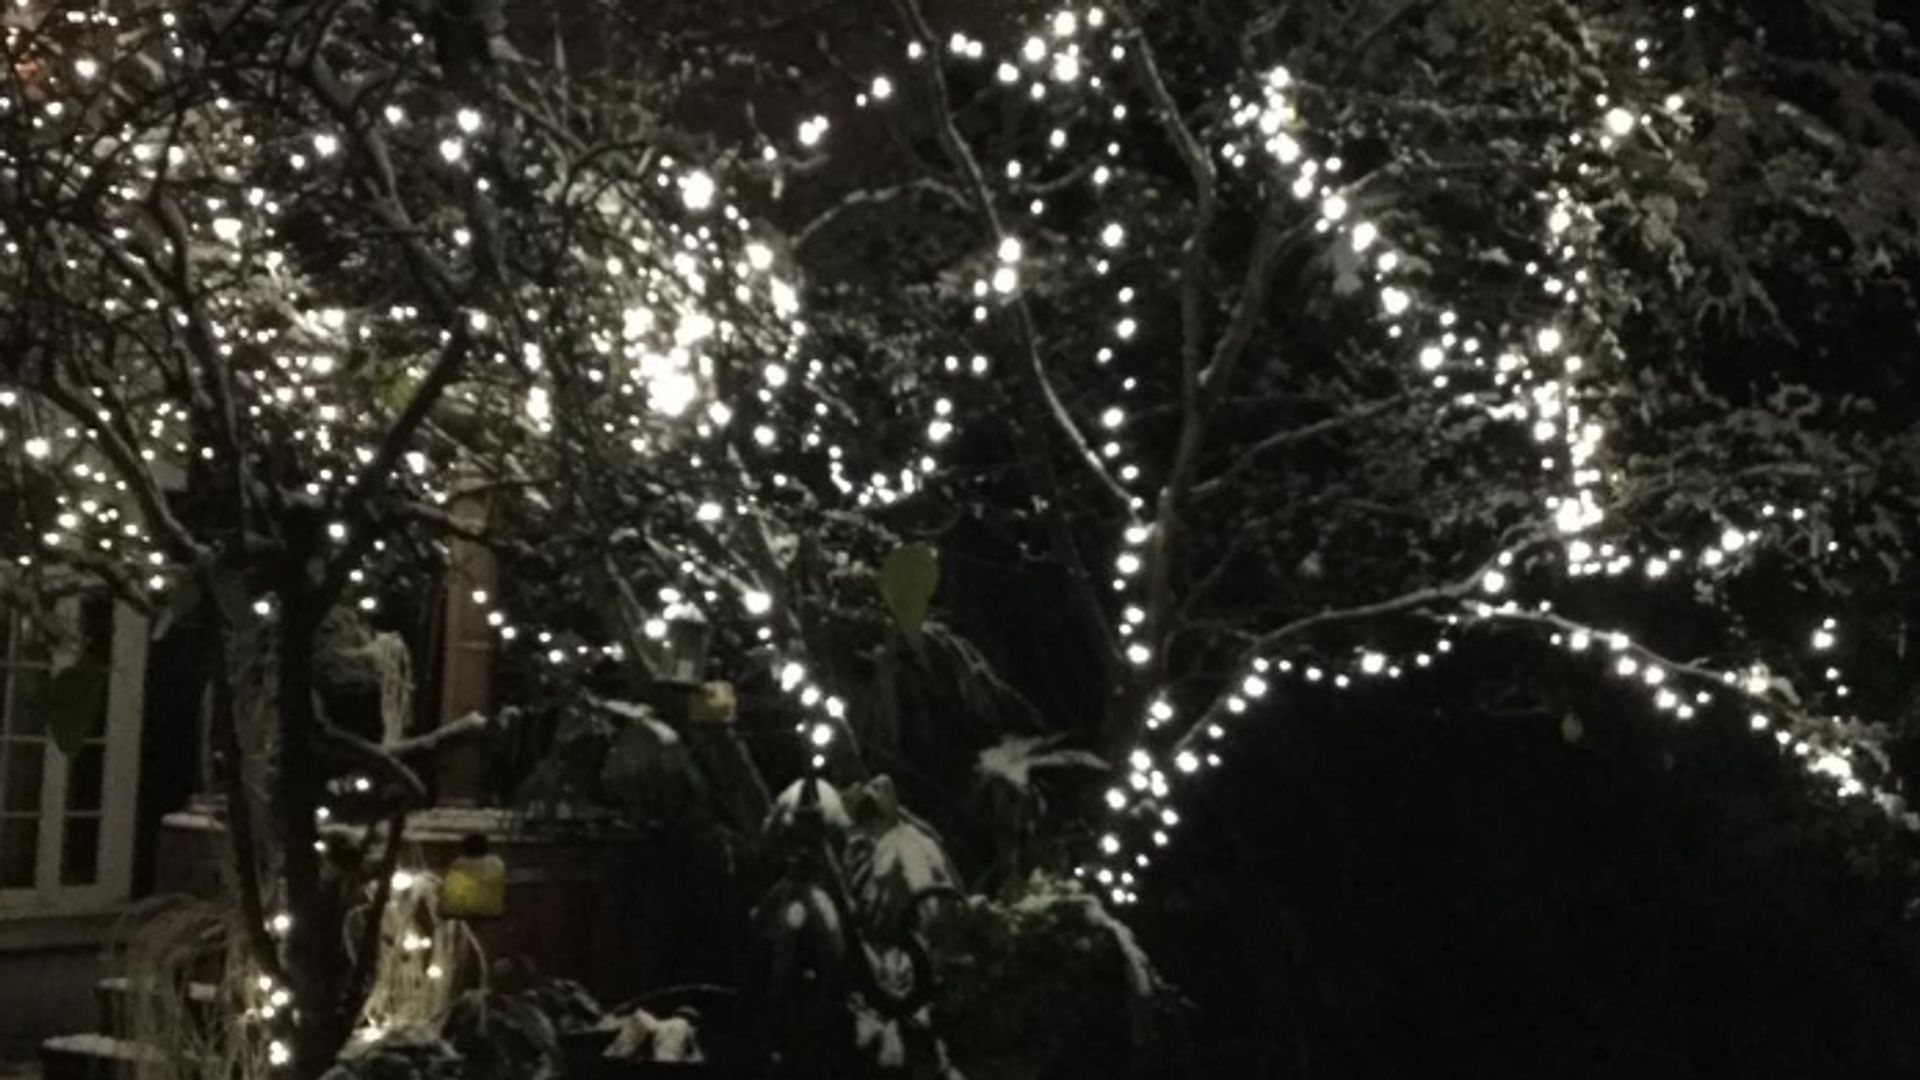 A garden covered in snow with lights hanging from a tree